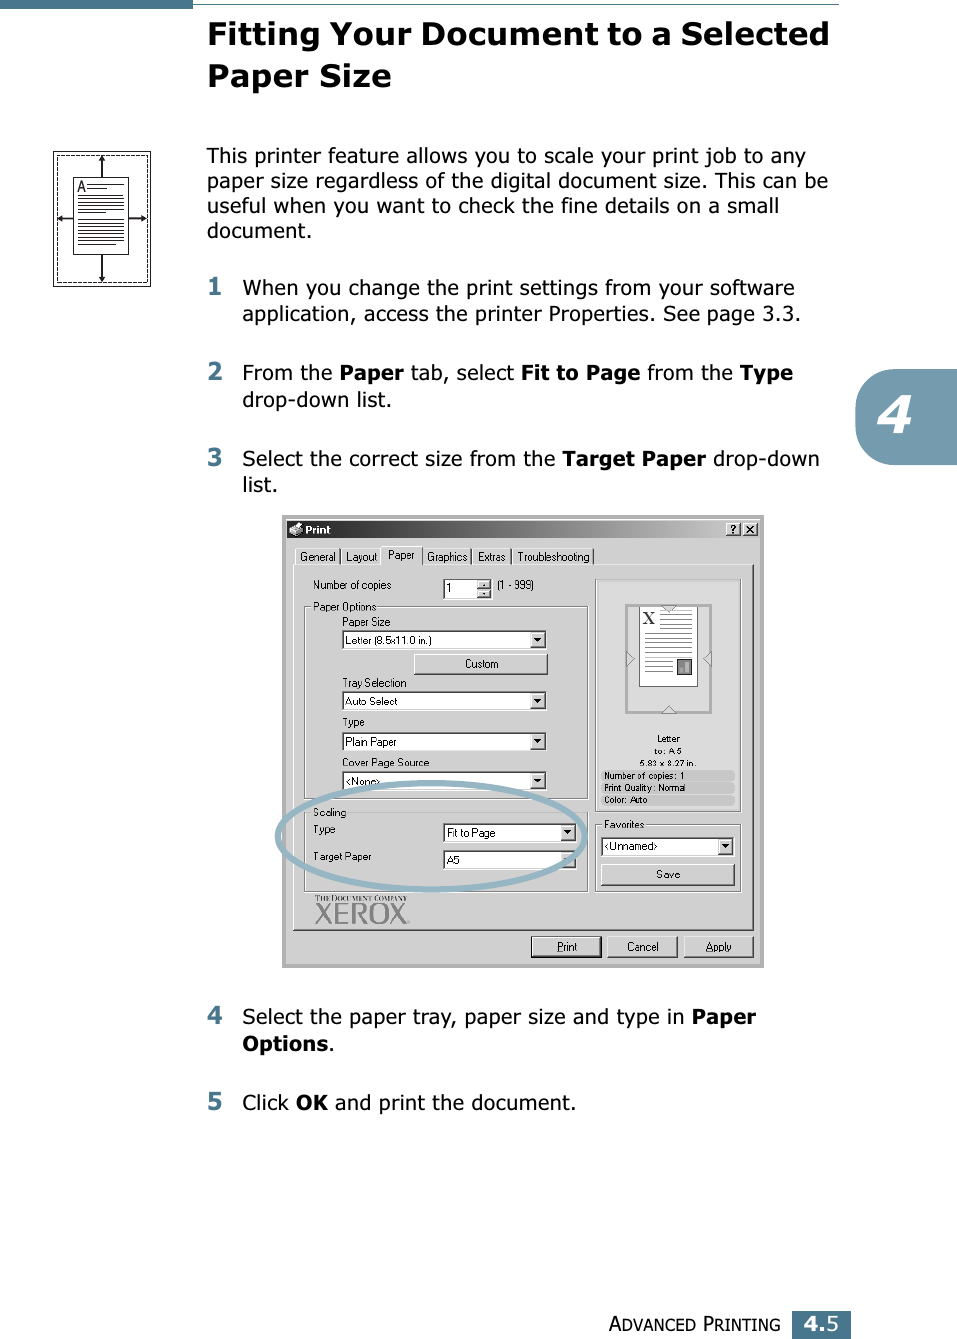 ADVANCED PRINTING4.54Fitting Your Document to a Selected Paper SizeThis printer feature allows you to scale your print job to any paper size regardless of the digital document size. This can be useful when you want to check the fine details on a small document. 1When you change the print settings from your software application, access the printer Properties. See page 3.3.2From the Paper tab, select Fit to Page from the Type drop-down list. 3Select the correct size from the Target Paper drop-down list.4Select the paper tray, paper size and type in Paper Options.5Click OK and print the document. A